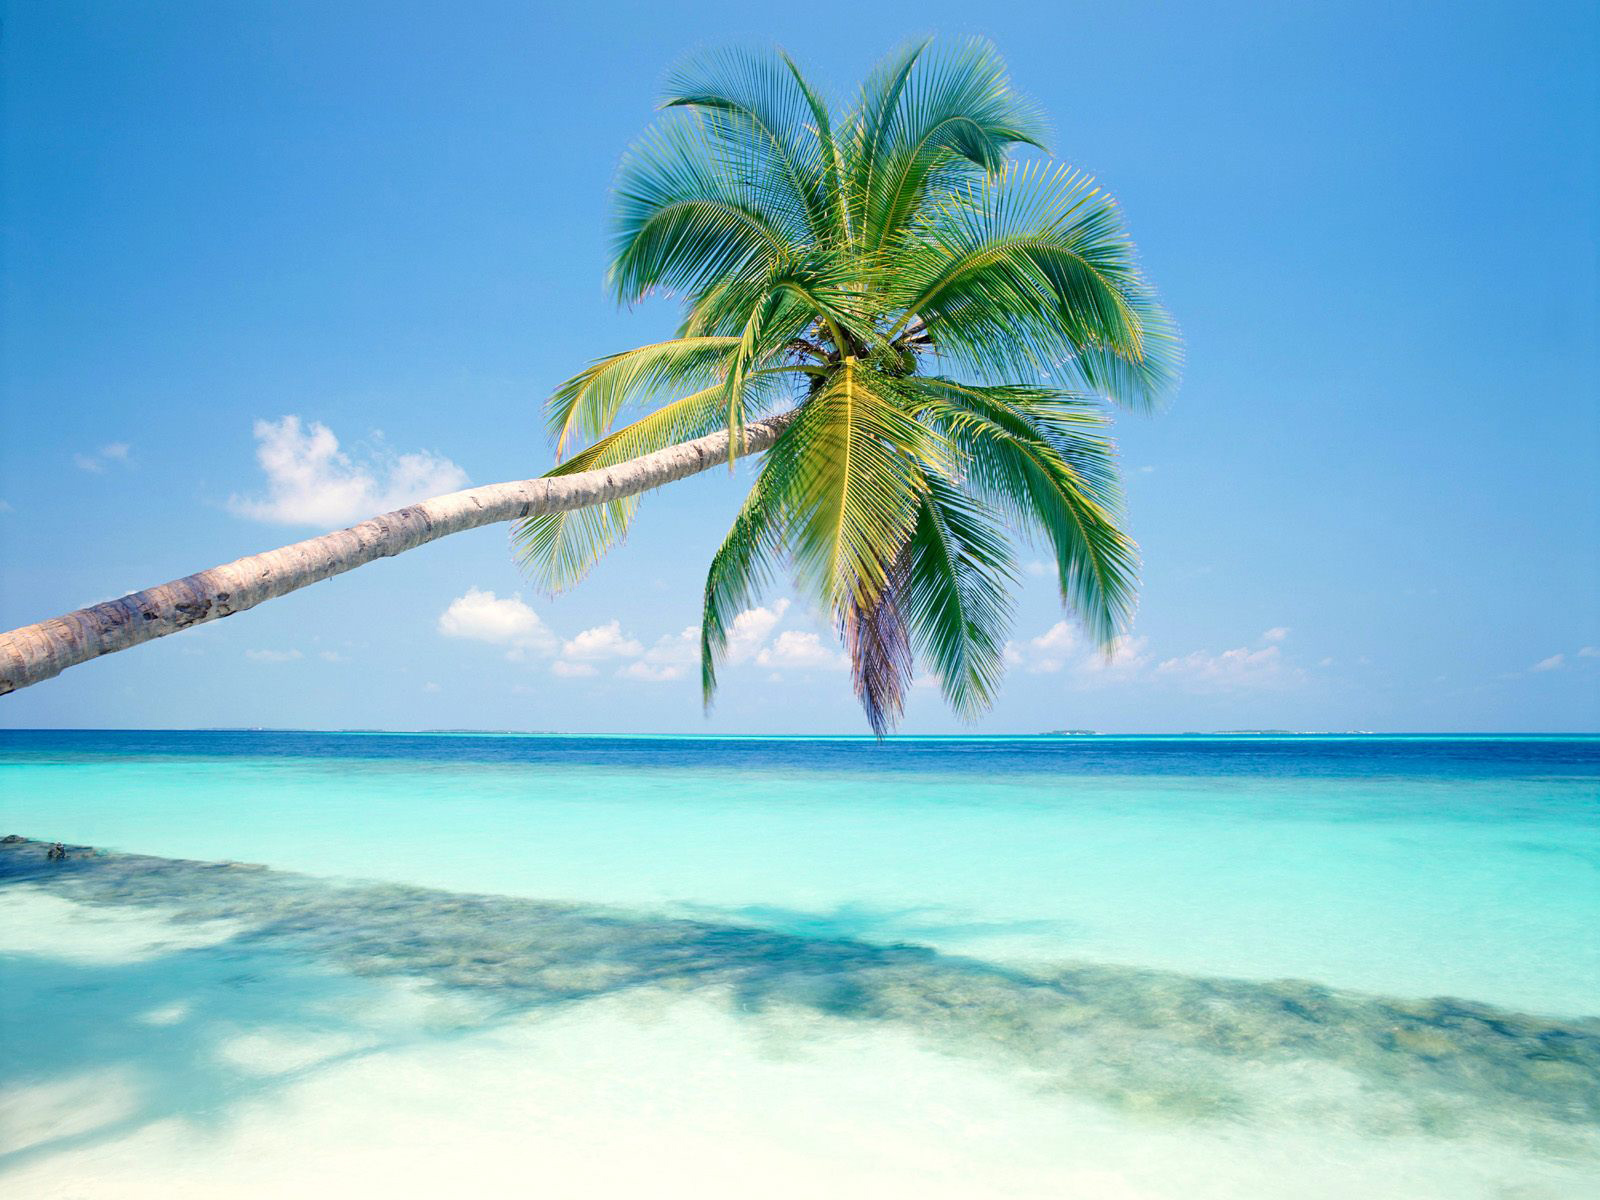 Desktop Wallpaper Of Tropical Beach With Palm Tree